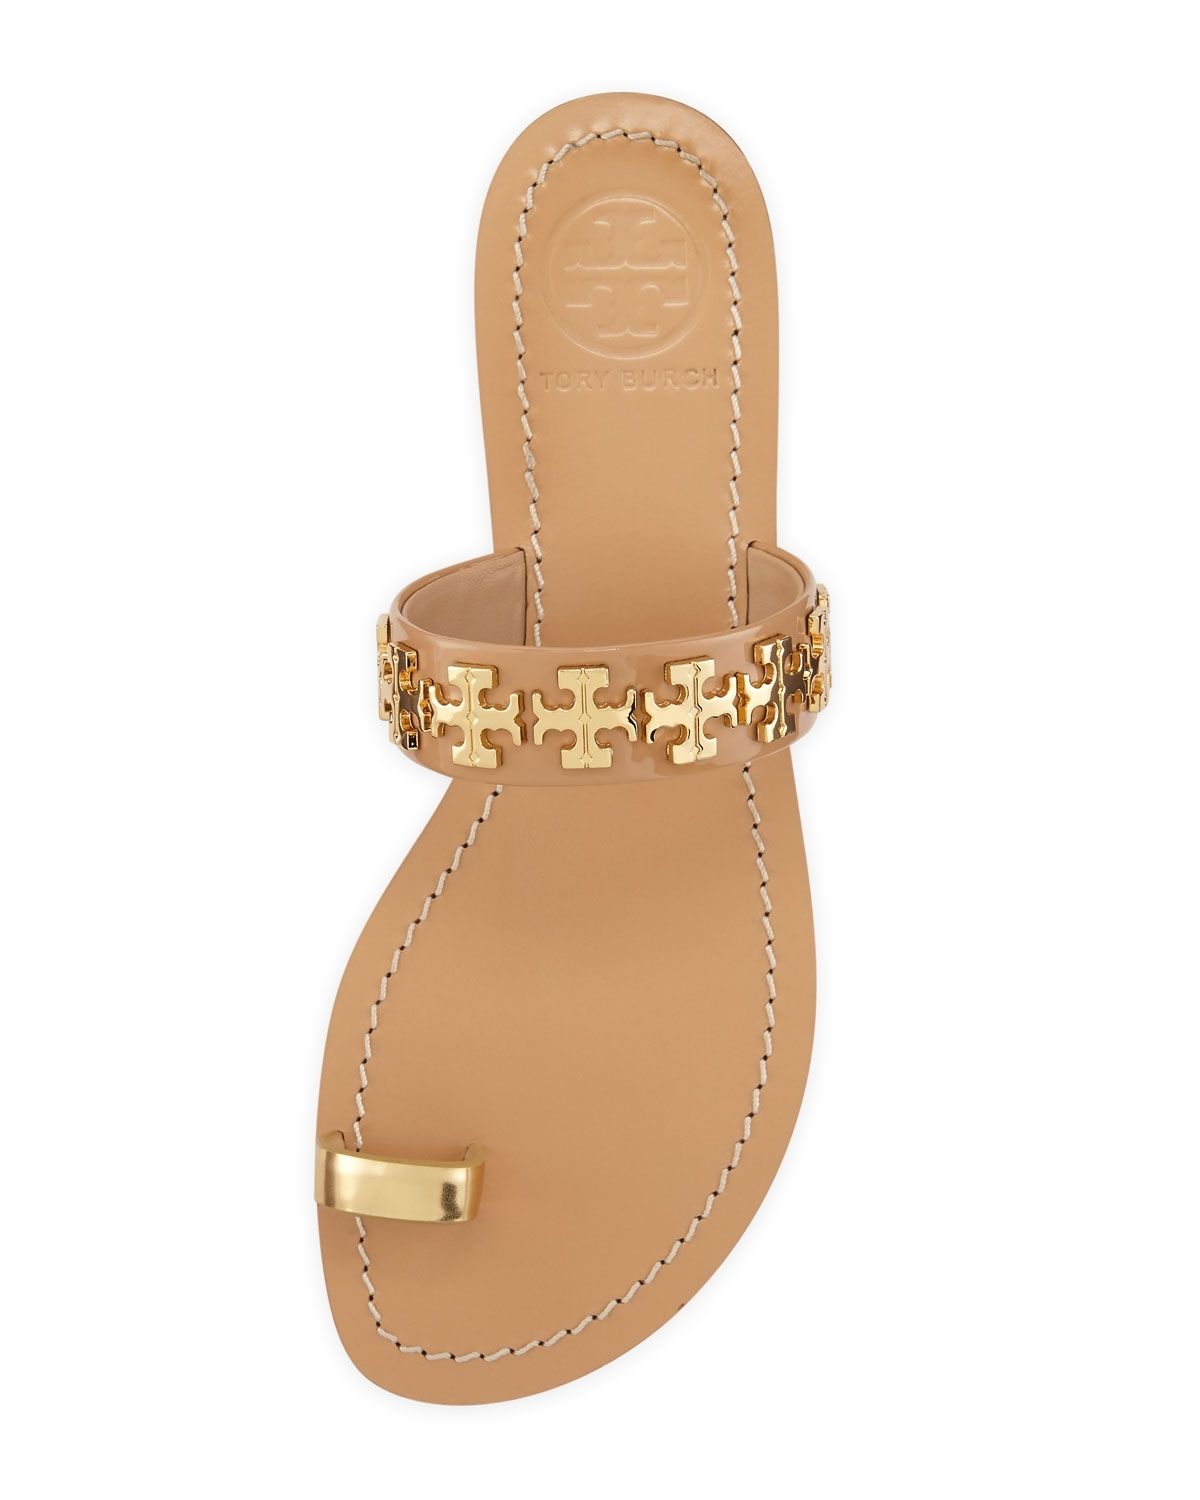 Tory Burch Val Patent Toe Ring Sandal, Camellia Pink/gold | Omg Within Current Rose Gold Toe Rings (View 11 of 15)